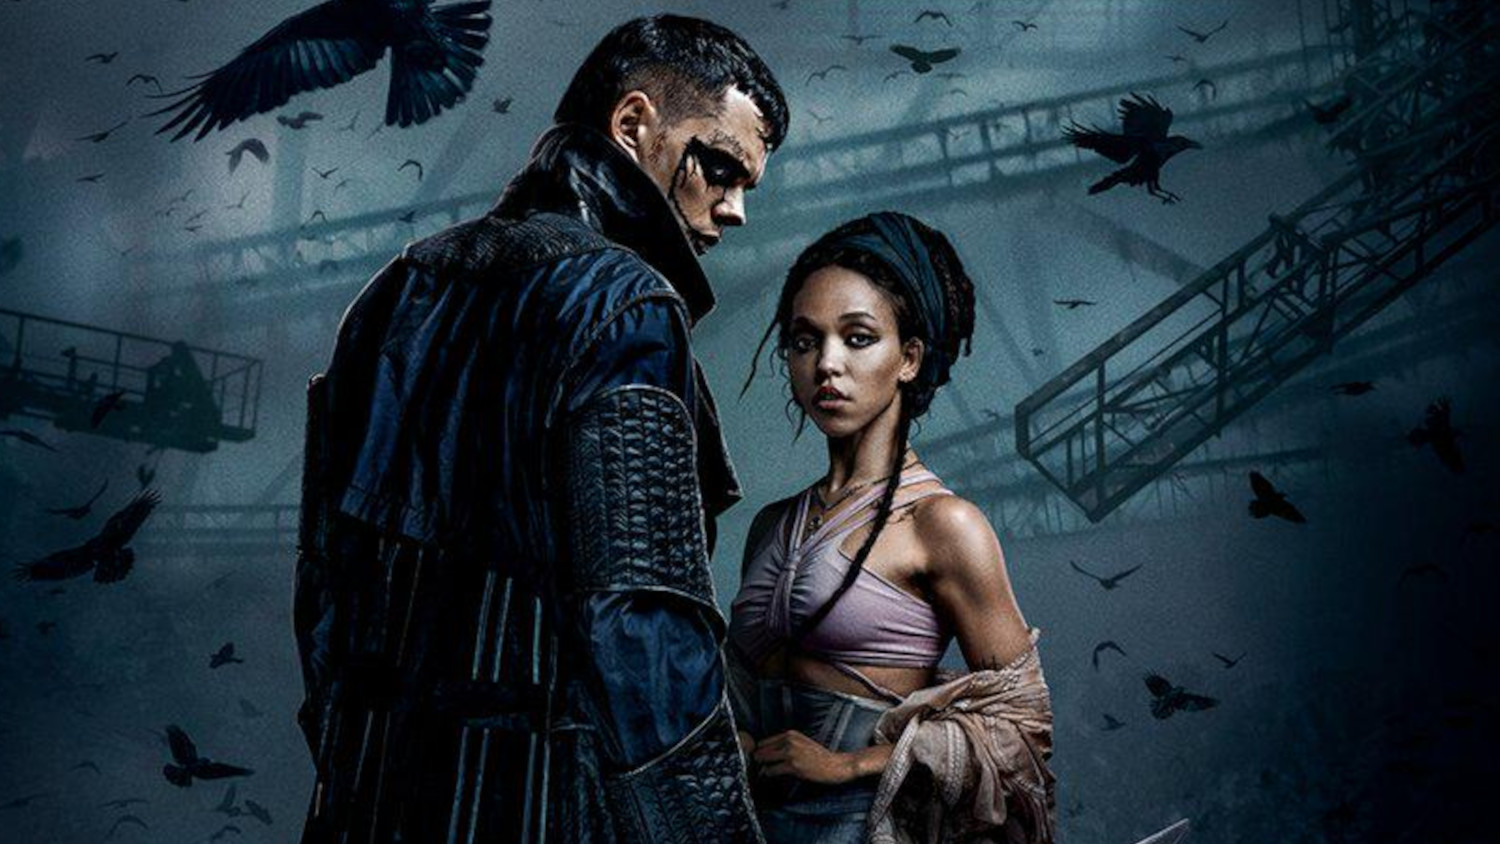 The Crow Poster Shows Off FKA twigs: ‘True Love Never Dies’